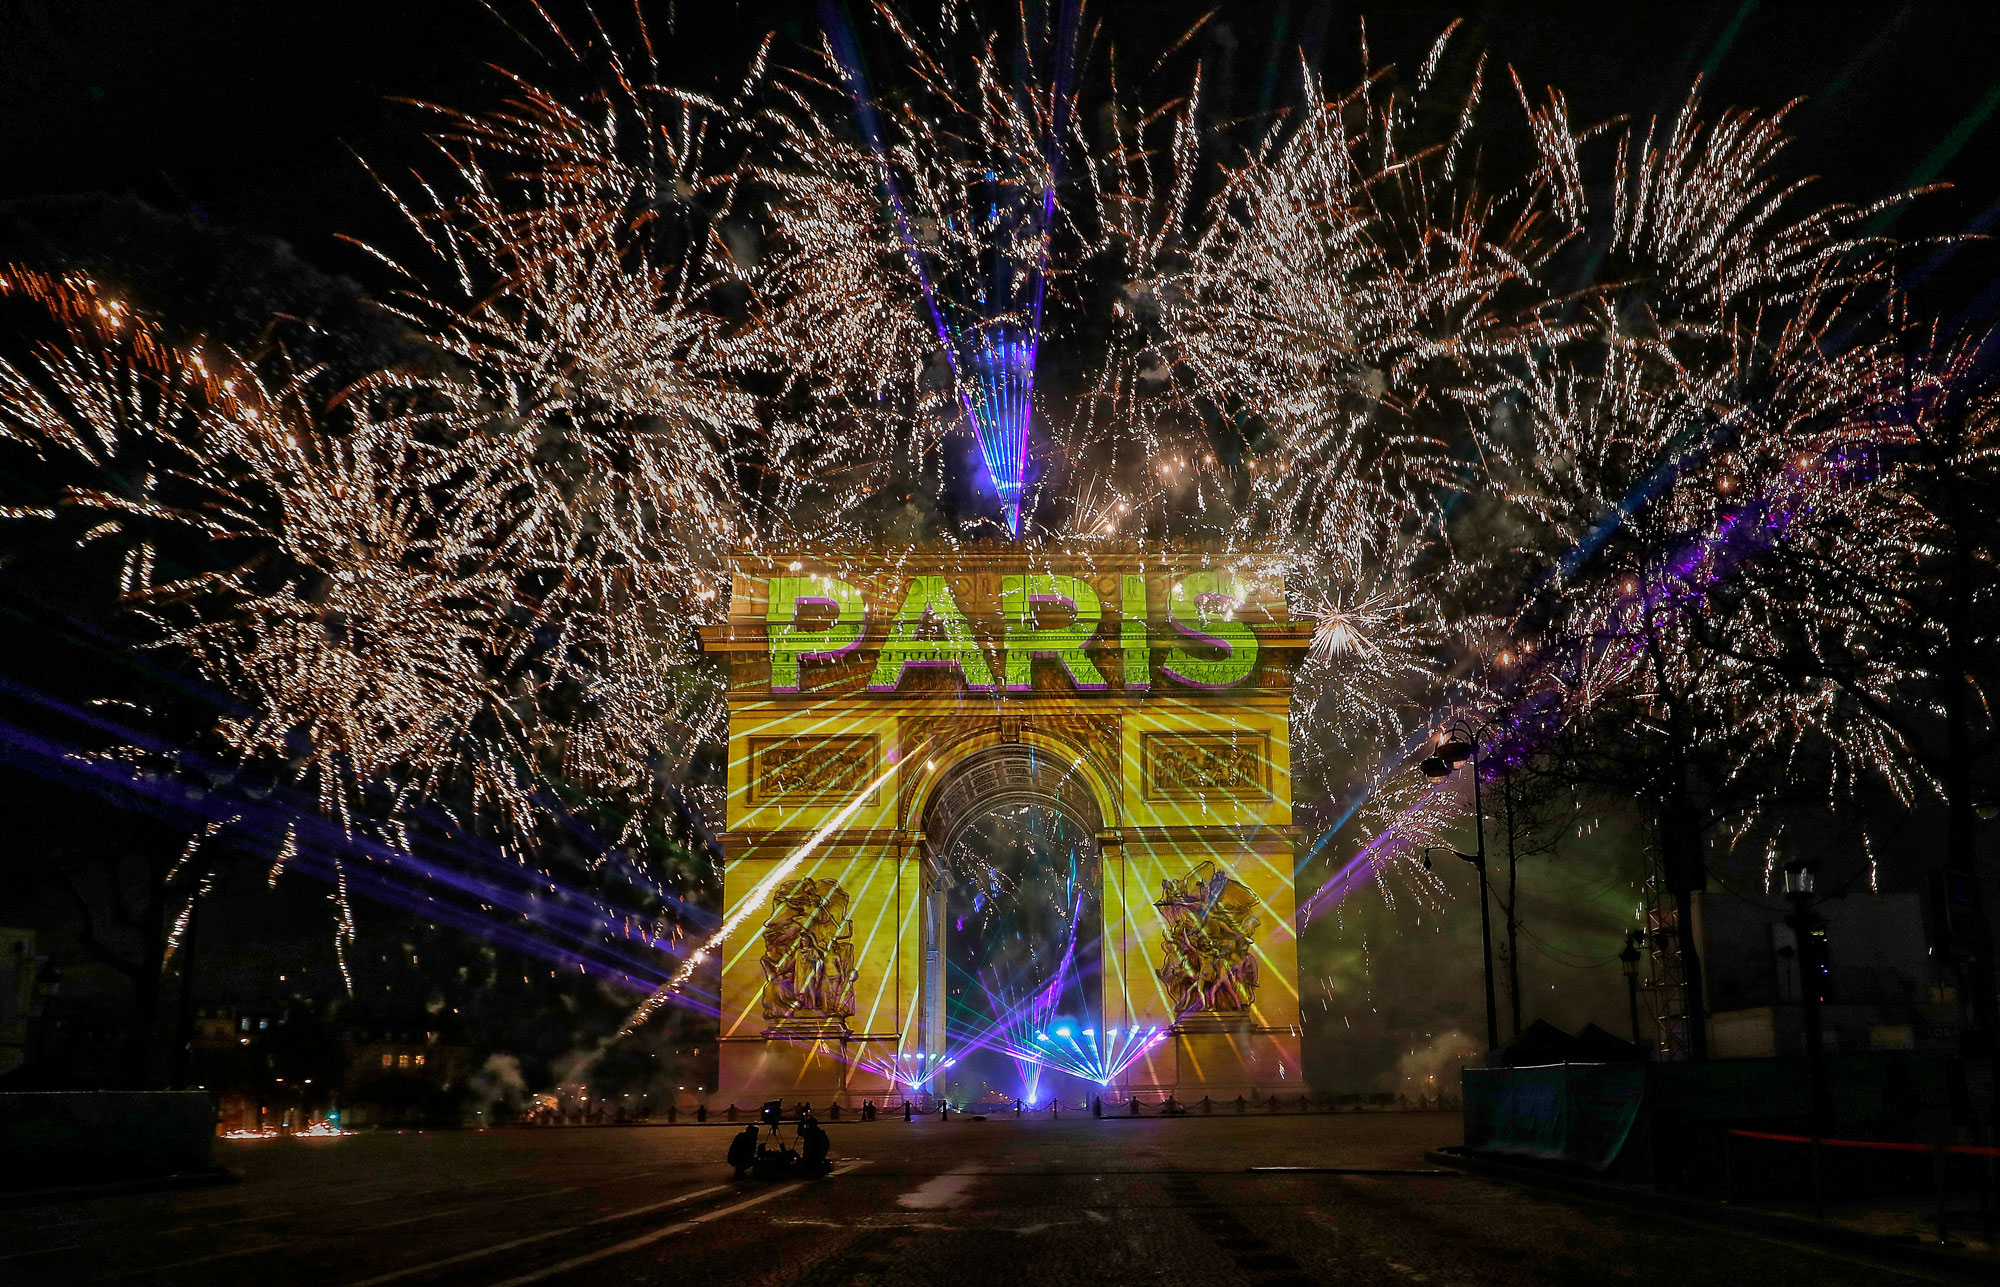 Fireworks are ignited as 'Paris 2020' is projected onto the Arc de Triomphe during the New Year's Celebration on the Champs-Elysees on December 31, 2019, in Paris.